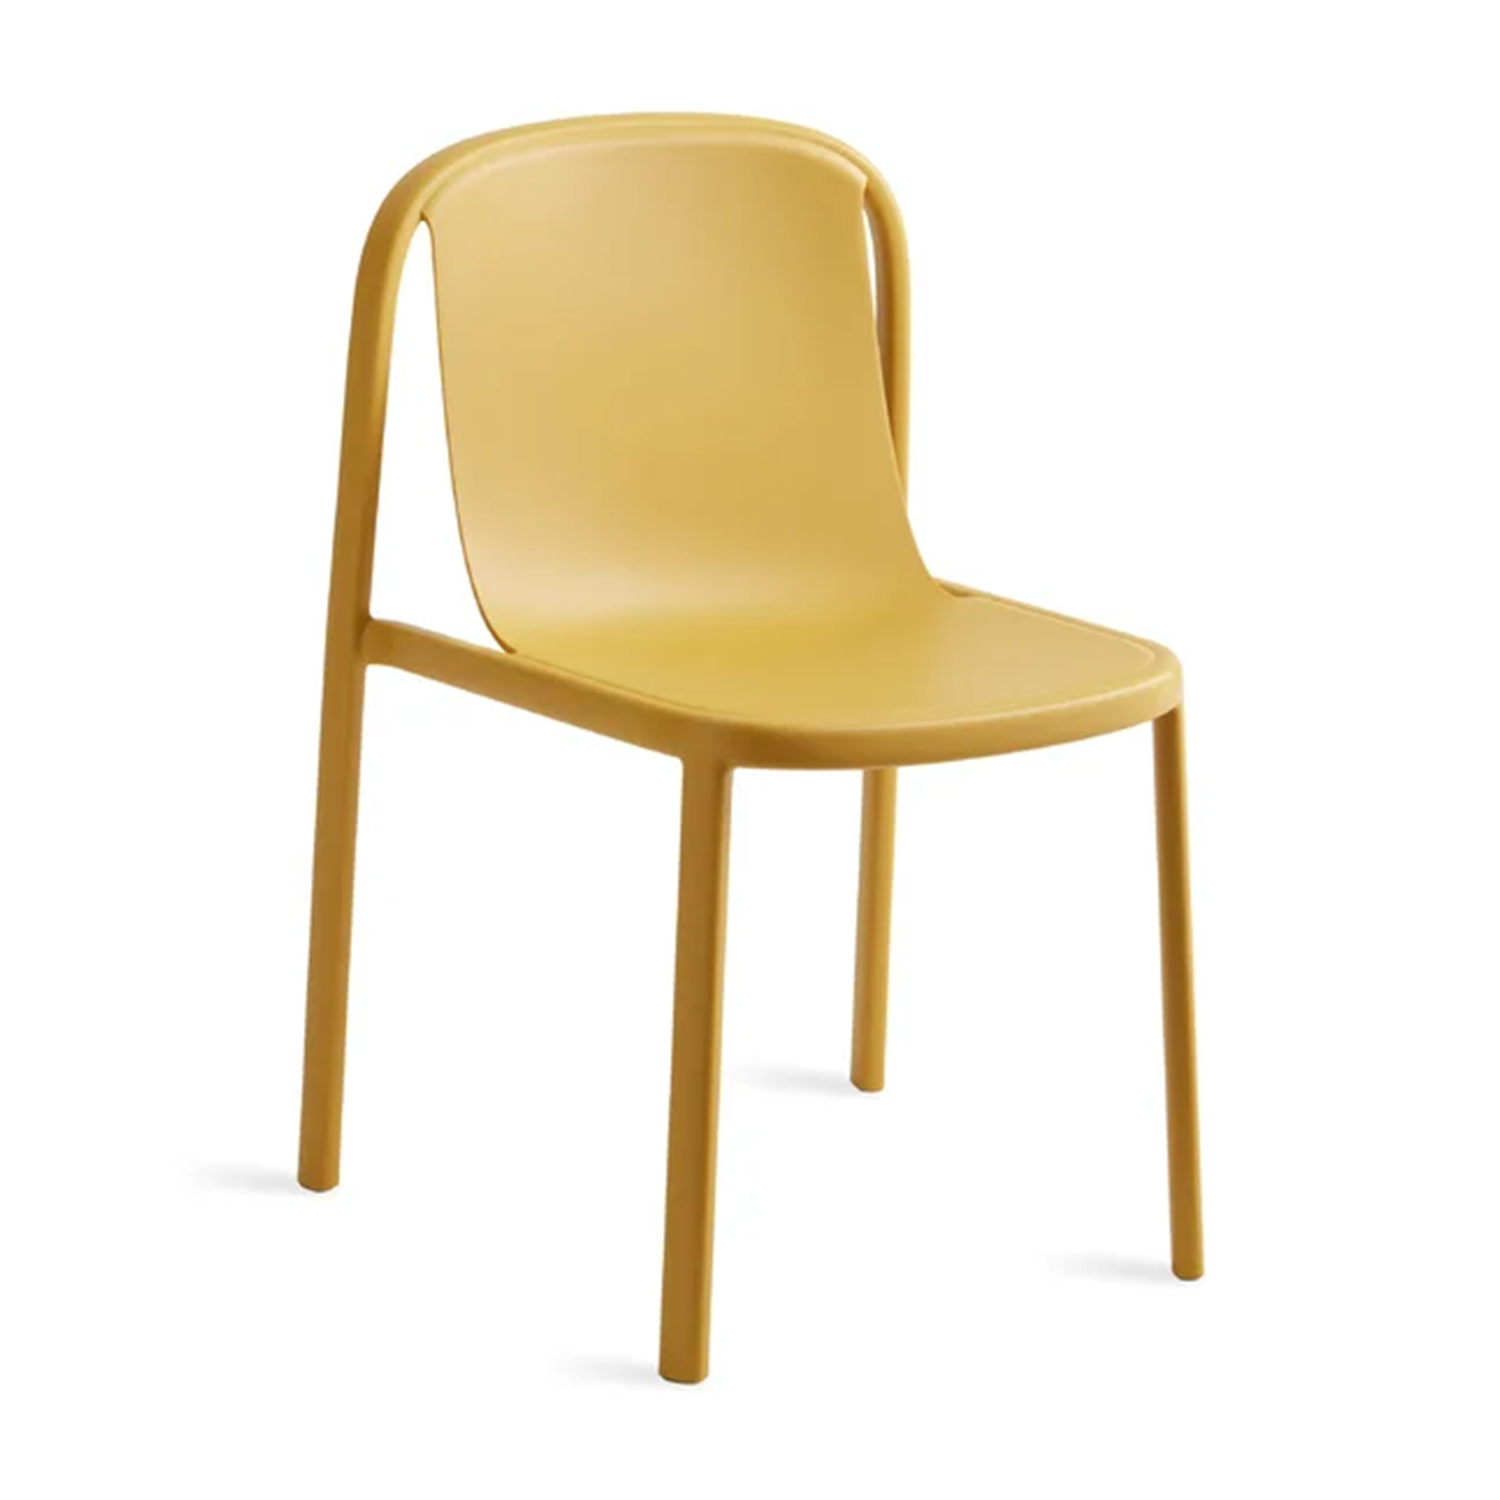 Decade Chair in mustard